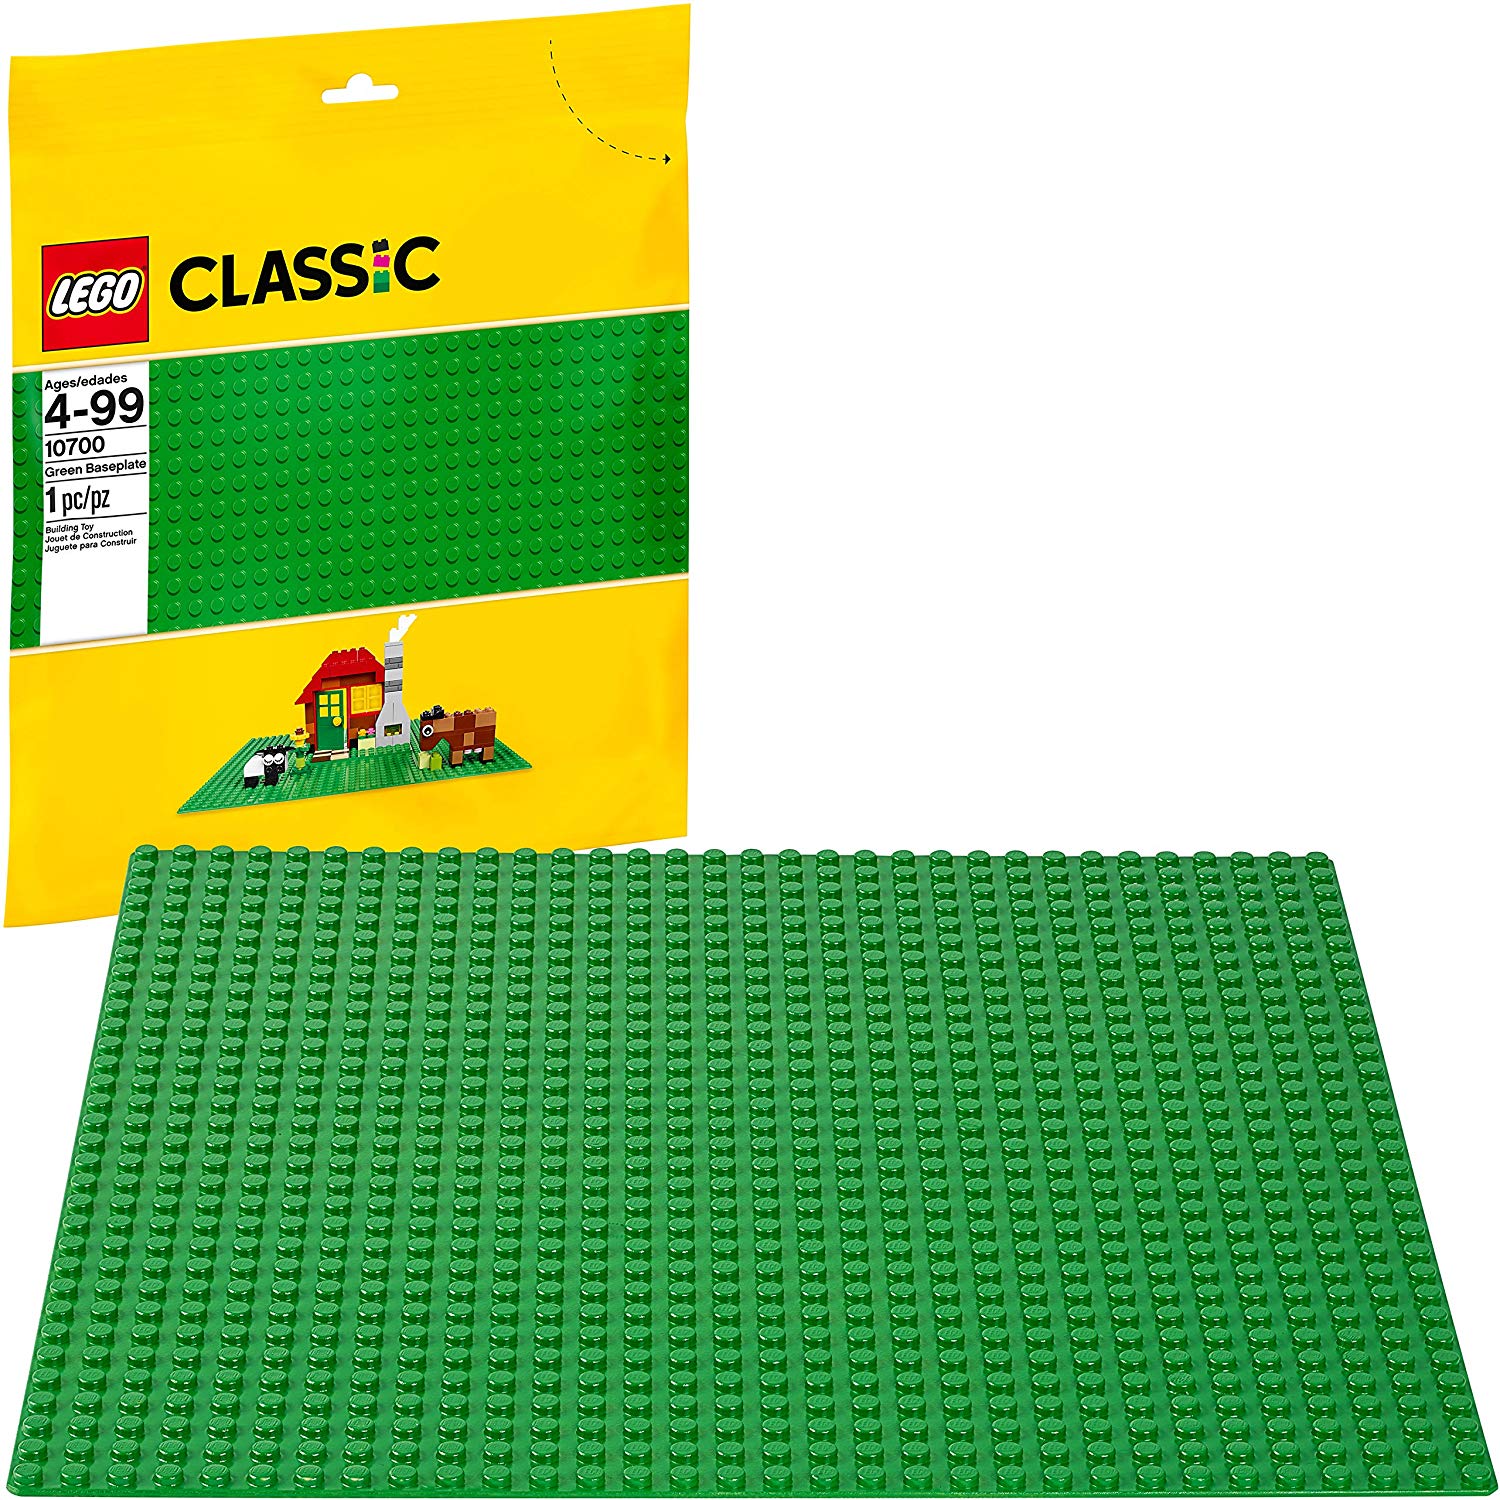 LEGO Classic Green Baseplate 2304 Supplement for Building, Playing, & Displaying LEGO $4.99 (REG $9.99)